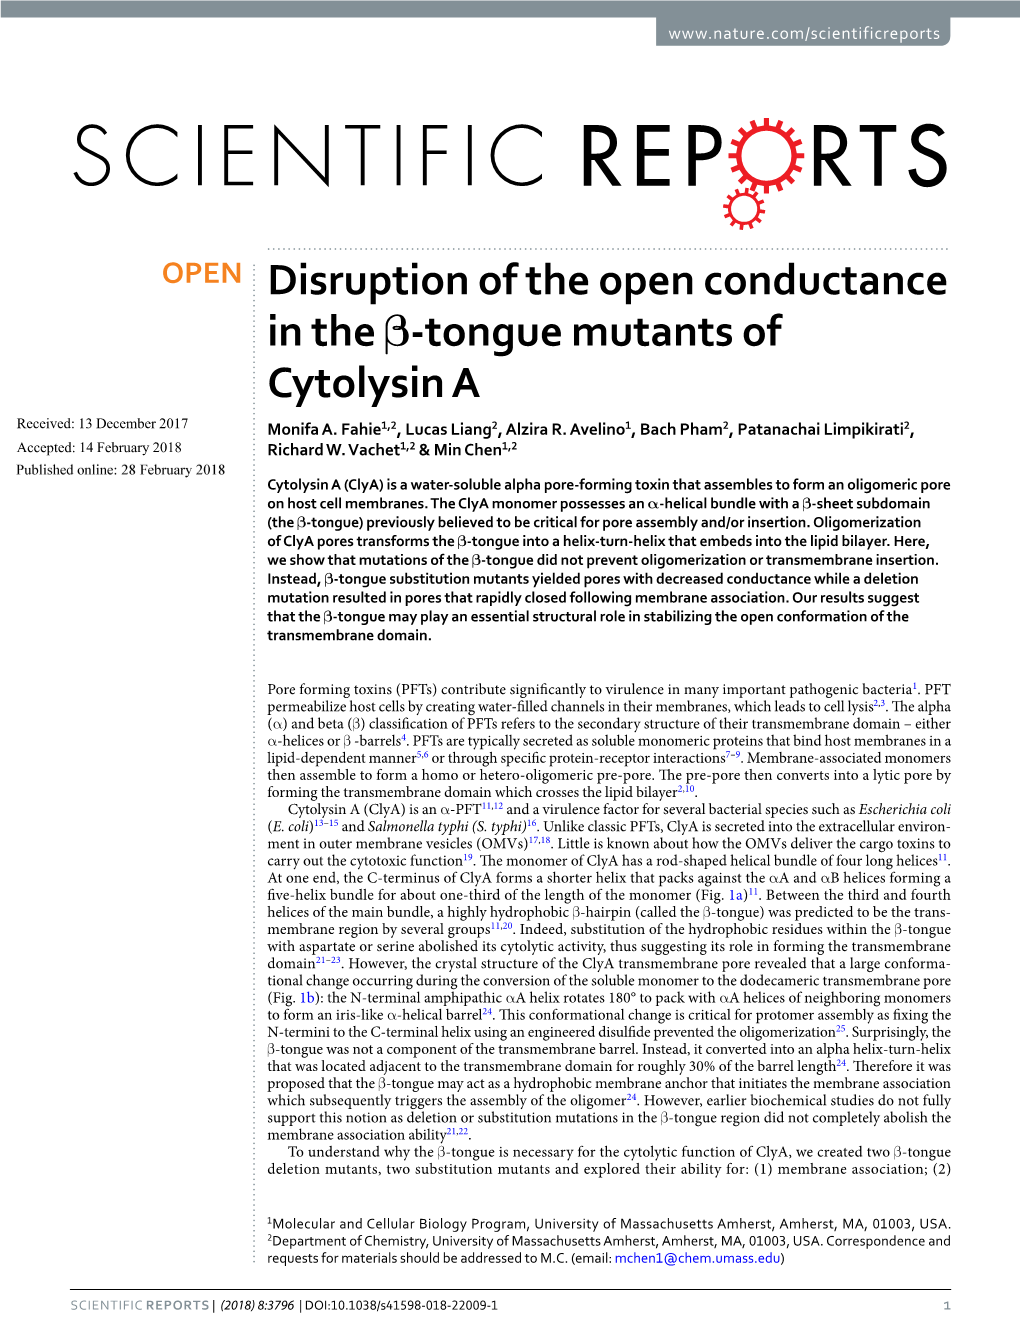 Disruption of the Open Conductance in the Β-Tongue Mutants of Cytolysin a Received: 13 December 2017 Monifa A